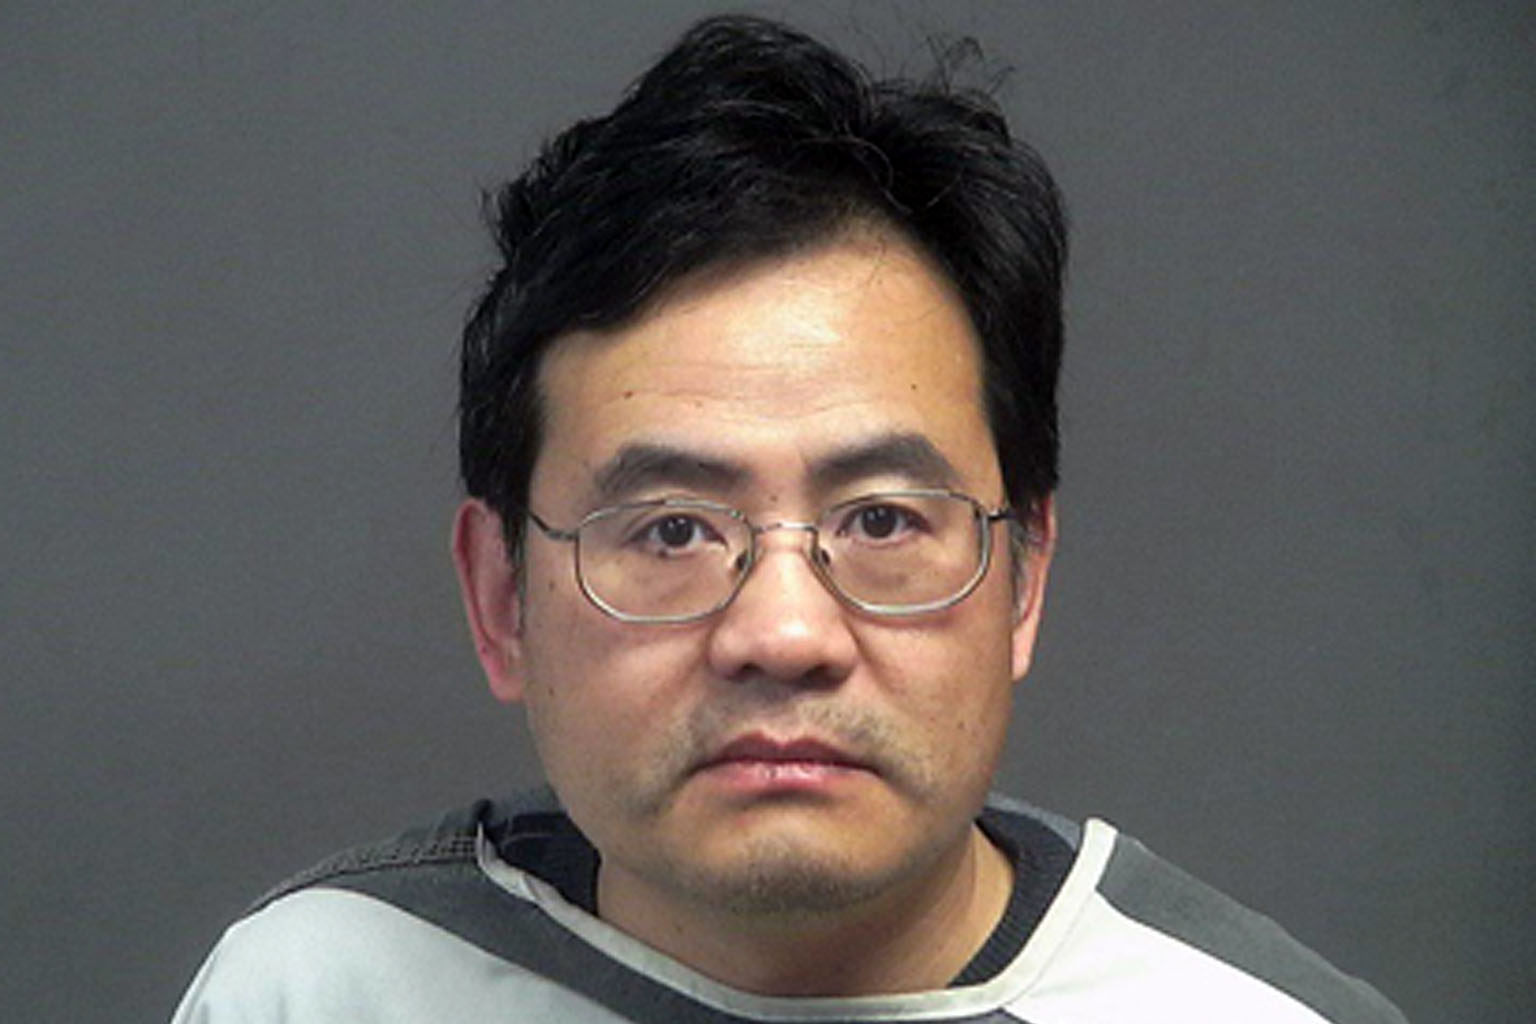 Former University of Tennessee associate professor Hu Anming, 52, one of several researchers who have been arrested and accused of failing to disclose their ties with China over the past two years under the China Initiative. Photo: Blount County Sheriff’s Office